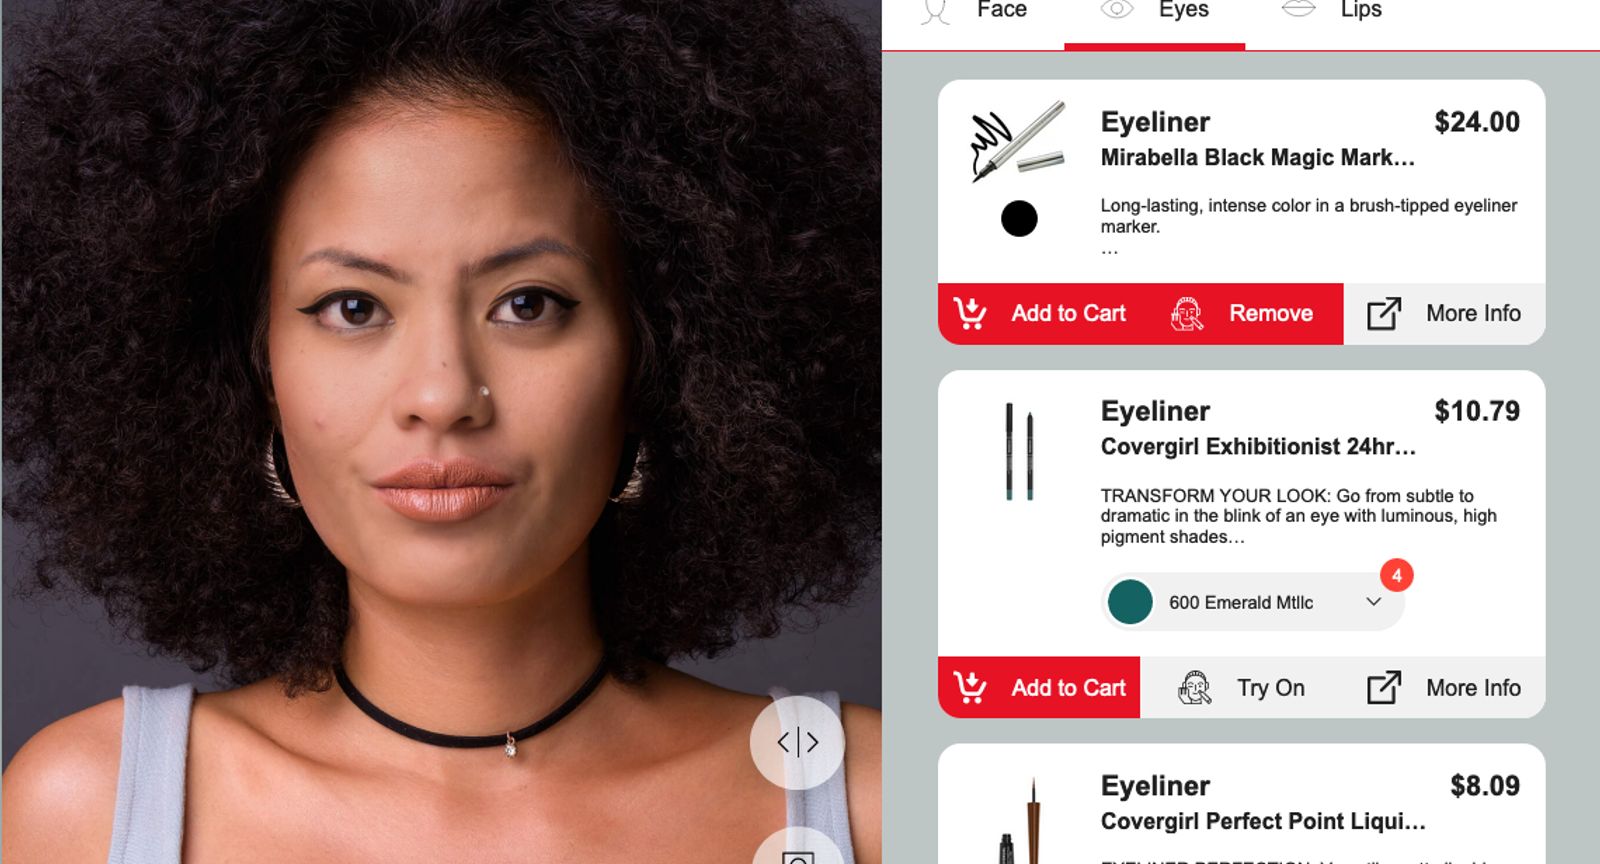 J.C.Penny Pioneers The Use of Digital Advisor and AR Try-on Makeup Among Department Stores